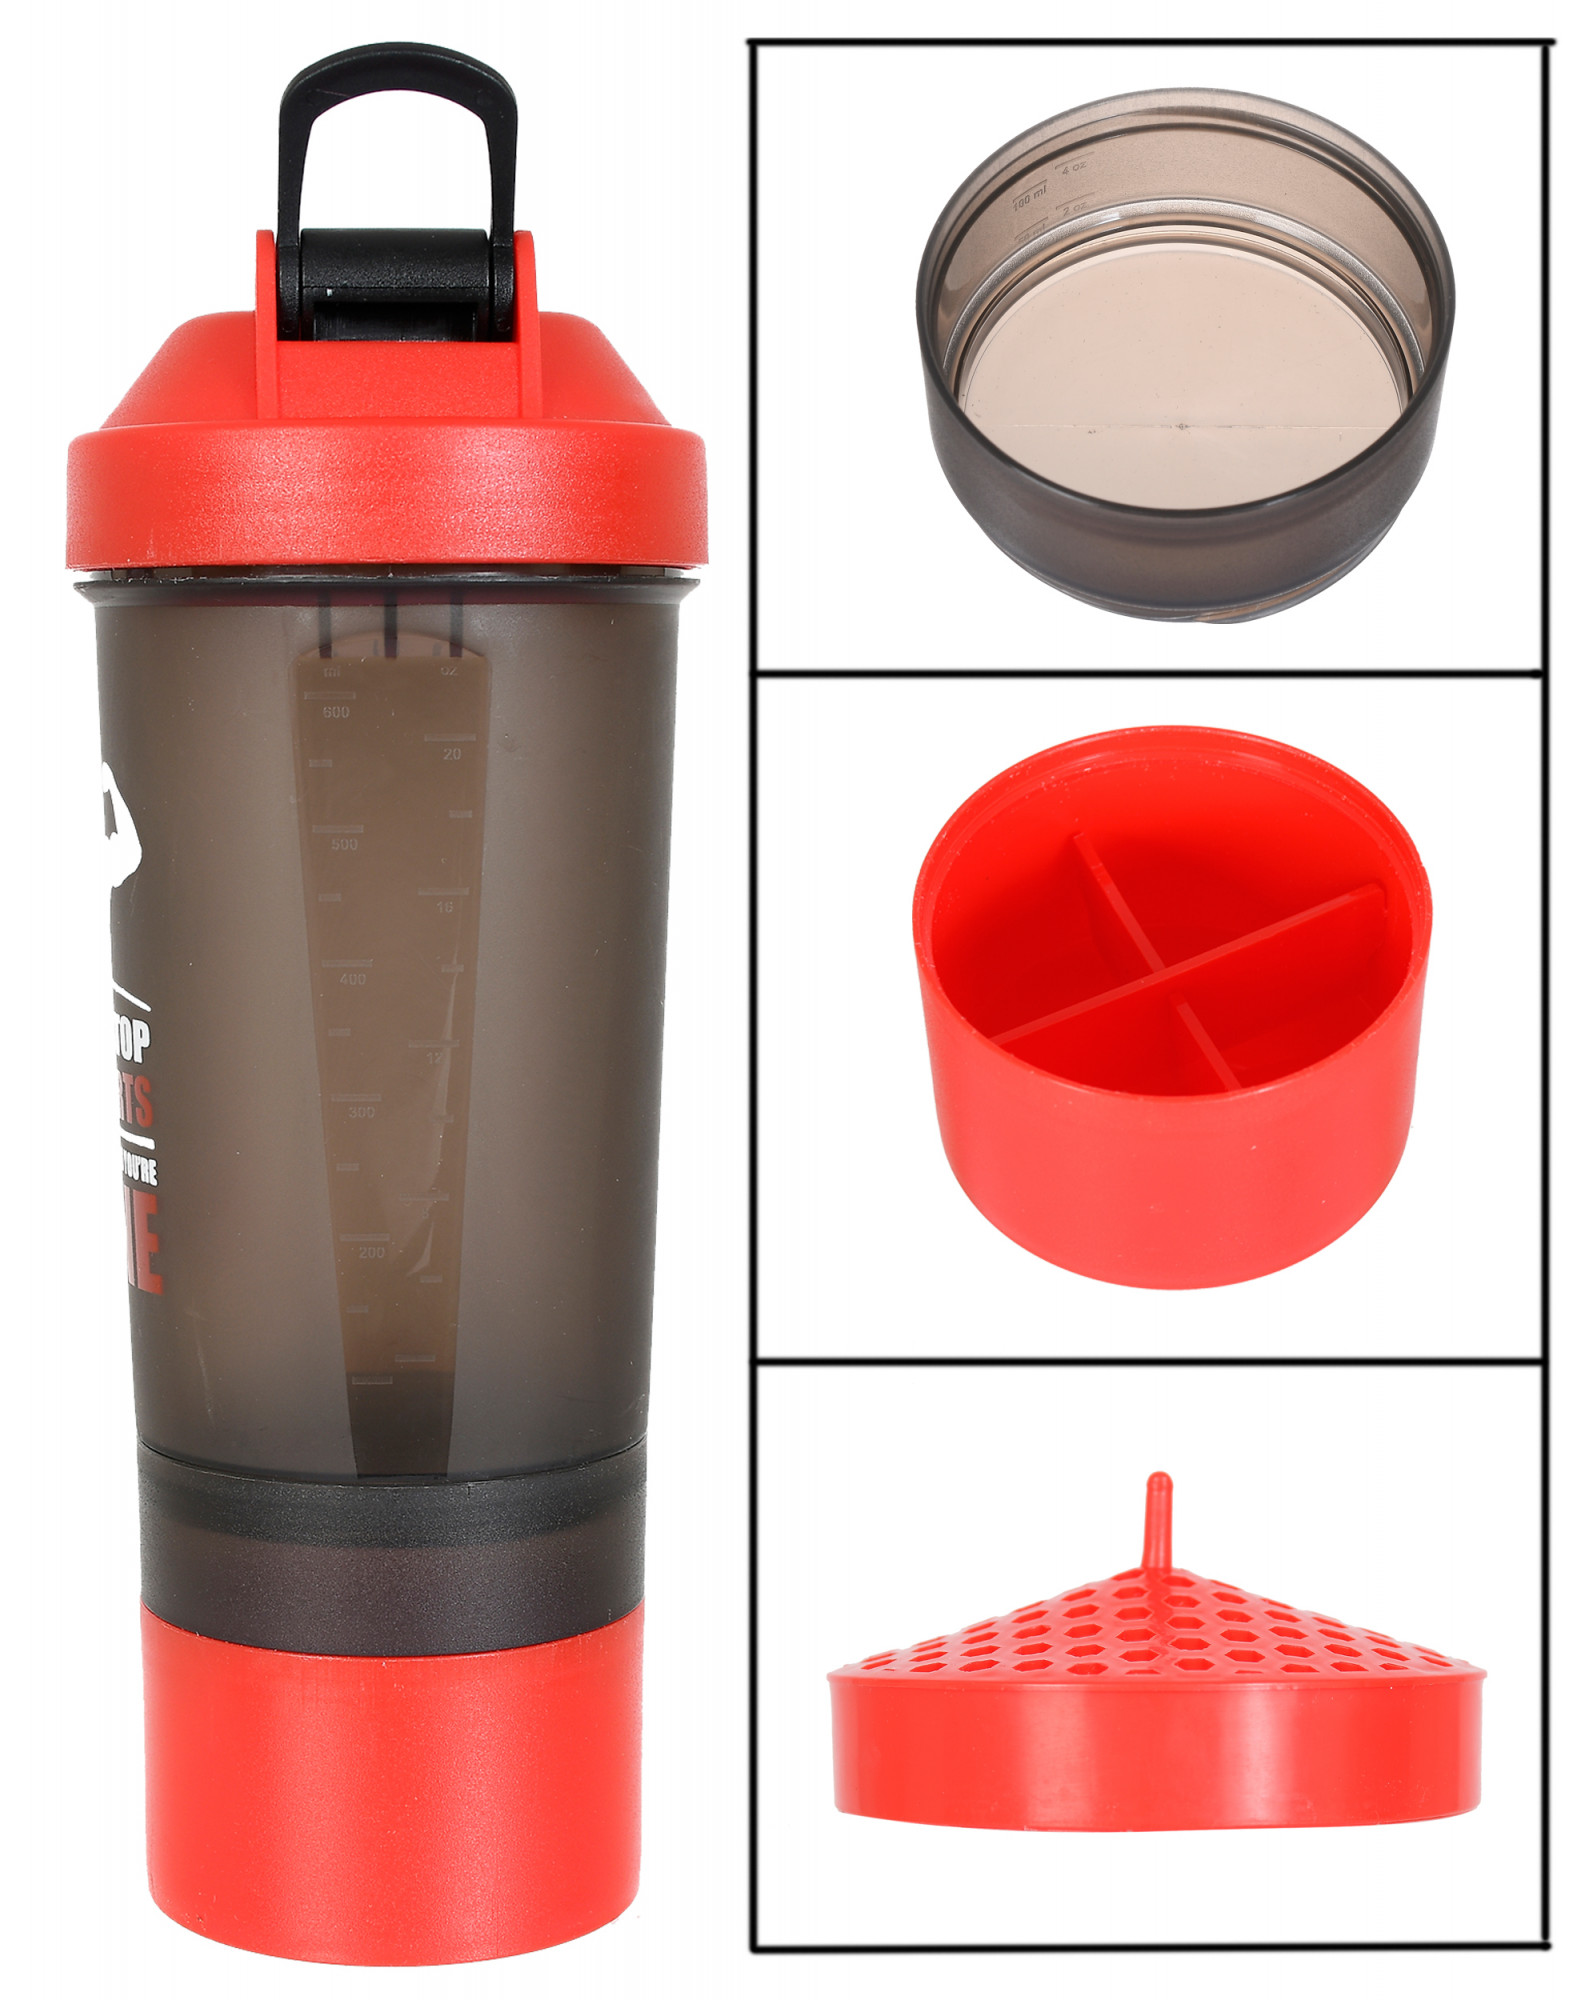 Kuber Industries Classic Shaker Bottle Perfect for Protein Shakes and Pre Workout with Pill Organizer and Storage for Protein Powder (Red)